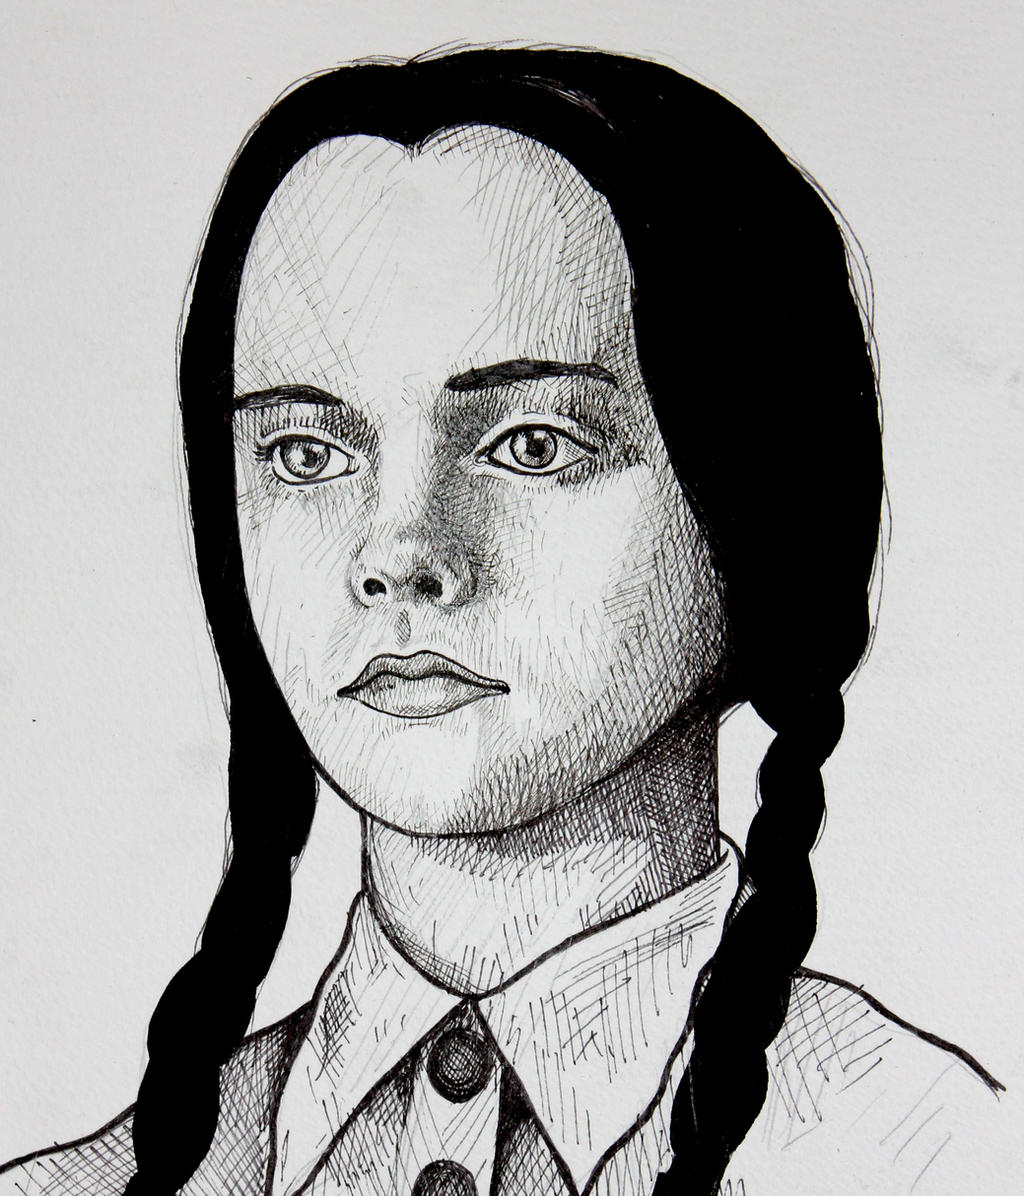 Top How To Draw Wednesday Addams in the world Learn more here ...